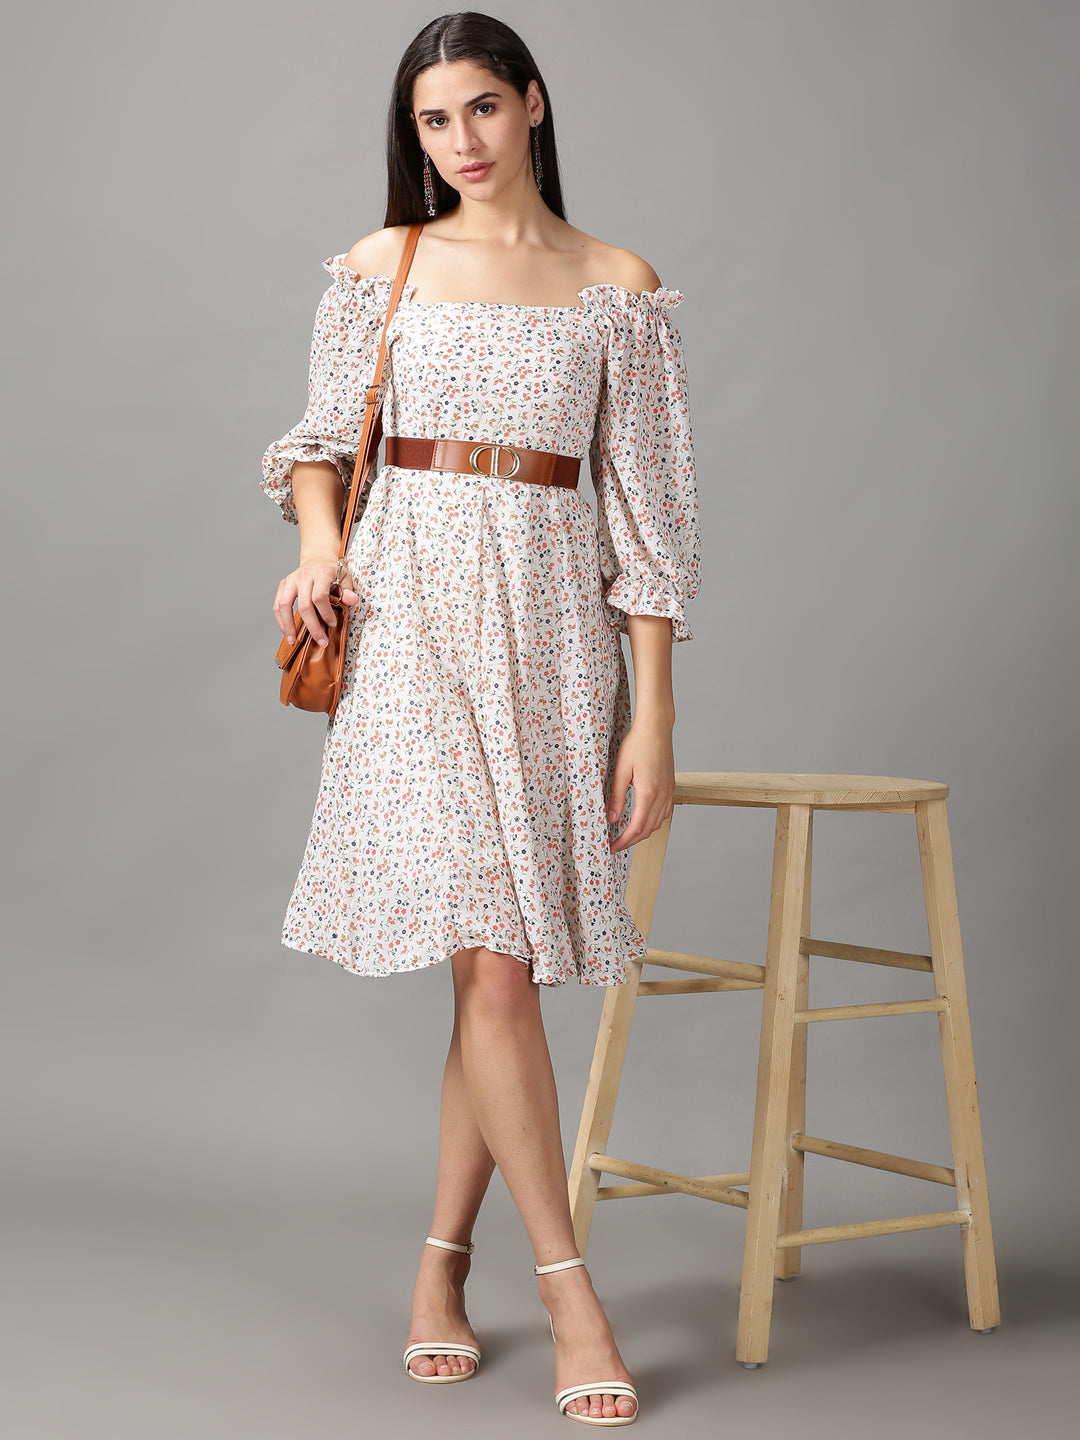 Women's White Printed Fit and Flare Dress